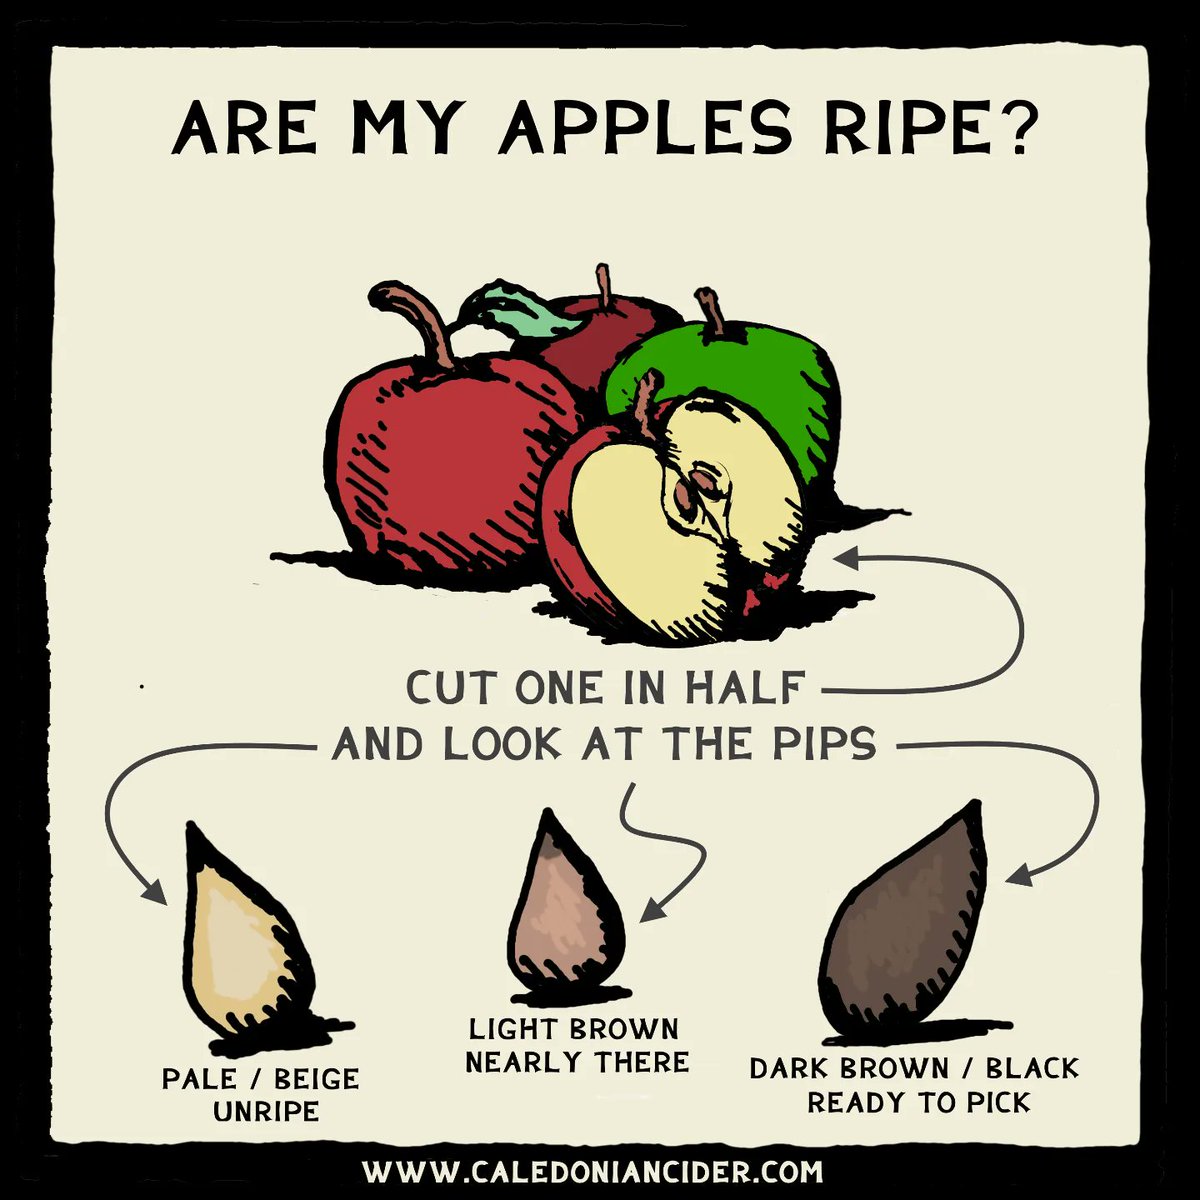 If you've 🍎 apples 🍏 to spare this year then don't let them go to waste. We'll swap them for cider 🍾, get in touch ✉ ryan@caledoniancider.com #apples #appleharvest #appleswap #cider #scottishcider #reducewaste #swapping #naturalcider